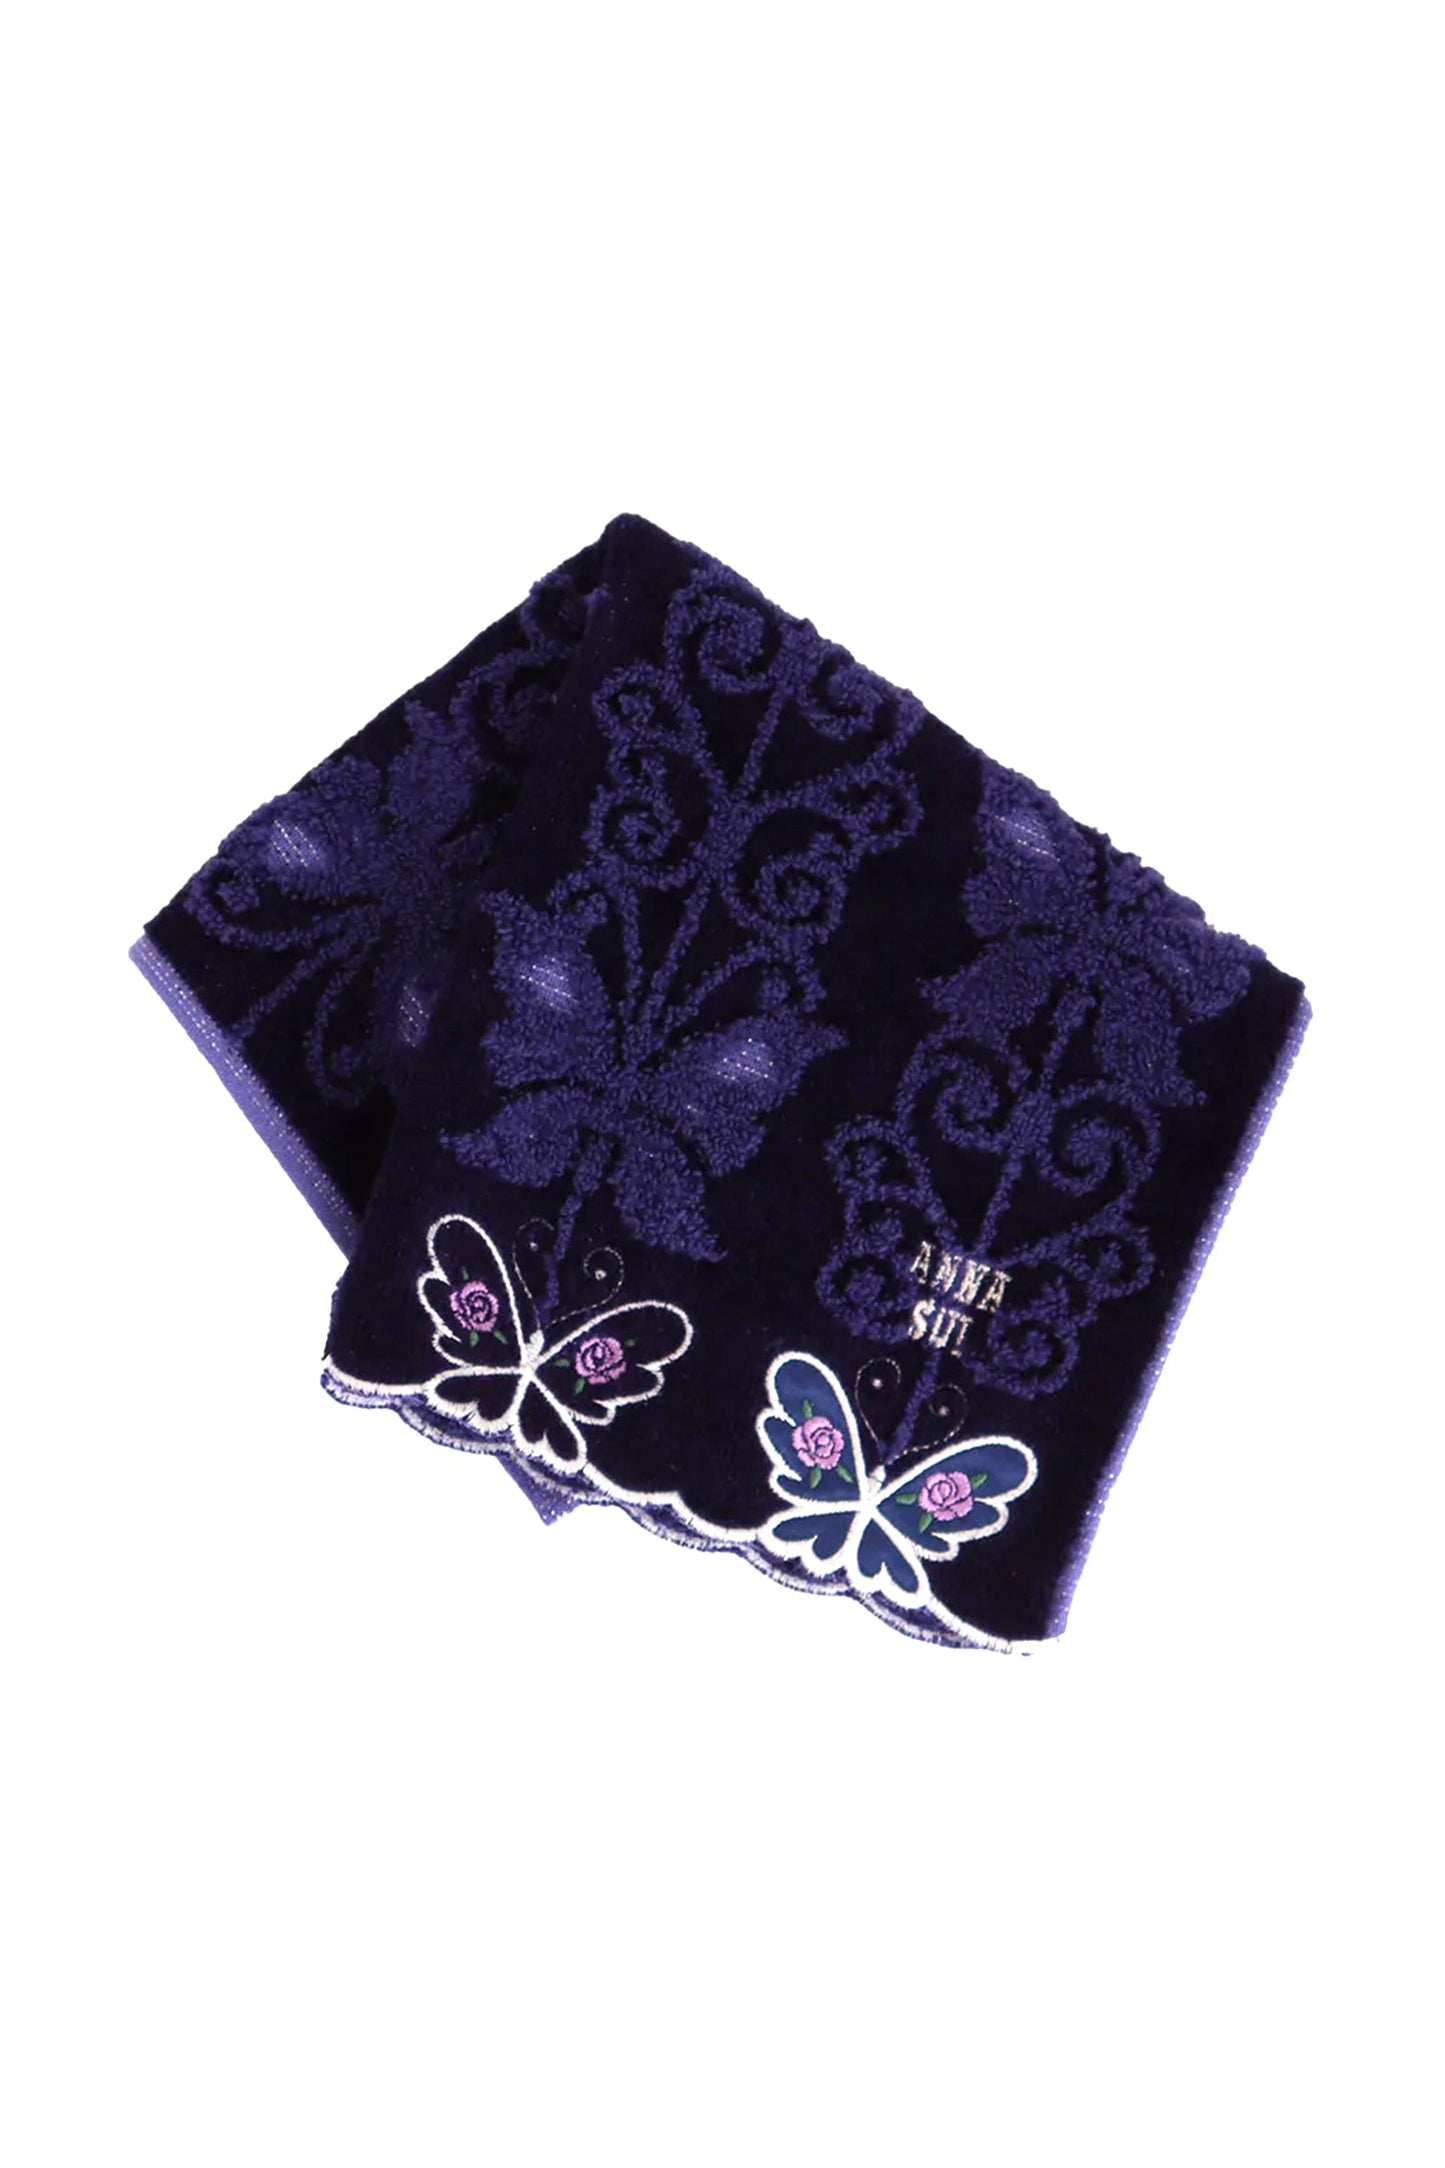 Butterfly Pattern Washcloth, 2 white butterflies and Anna Sui label in right corner